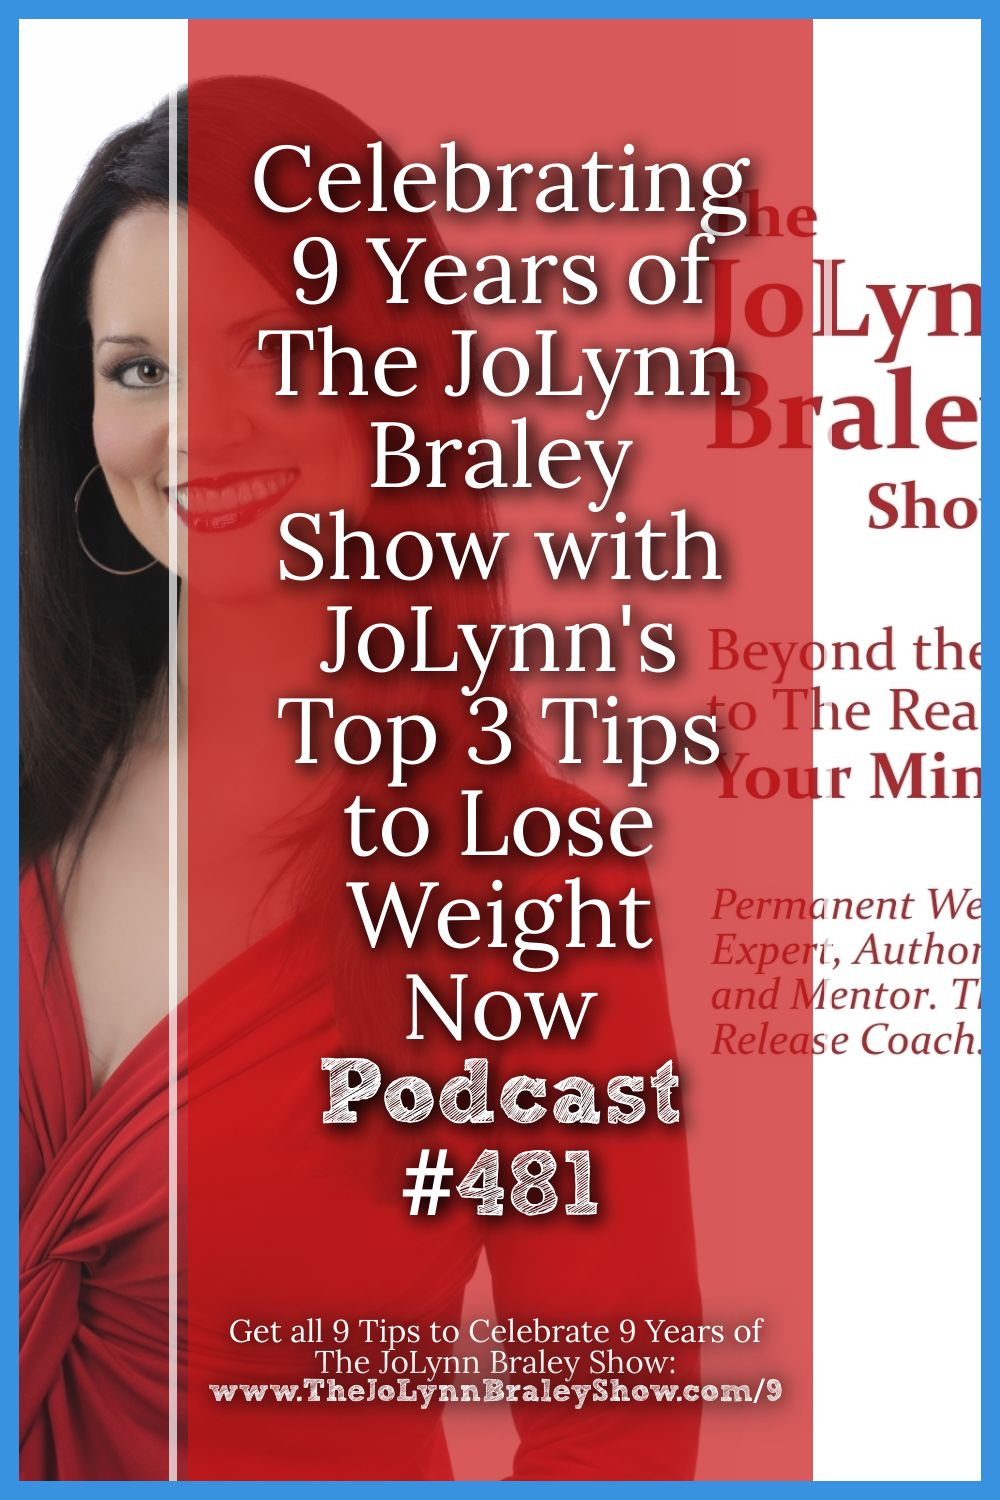 Celebrating Nine Years of The JoLynn Braley Show with my Top 3 Tips to Lose Weight Now [Podcast #481]